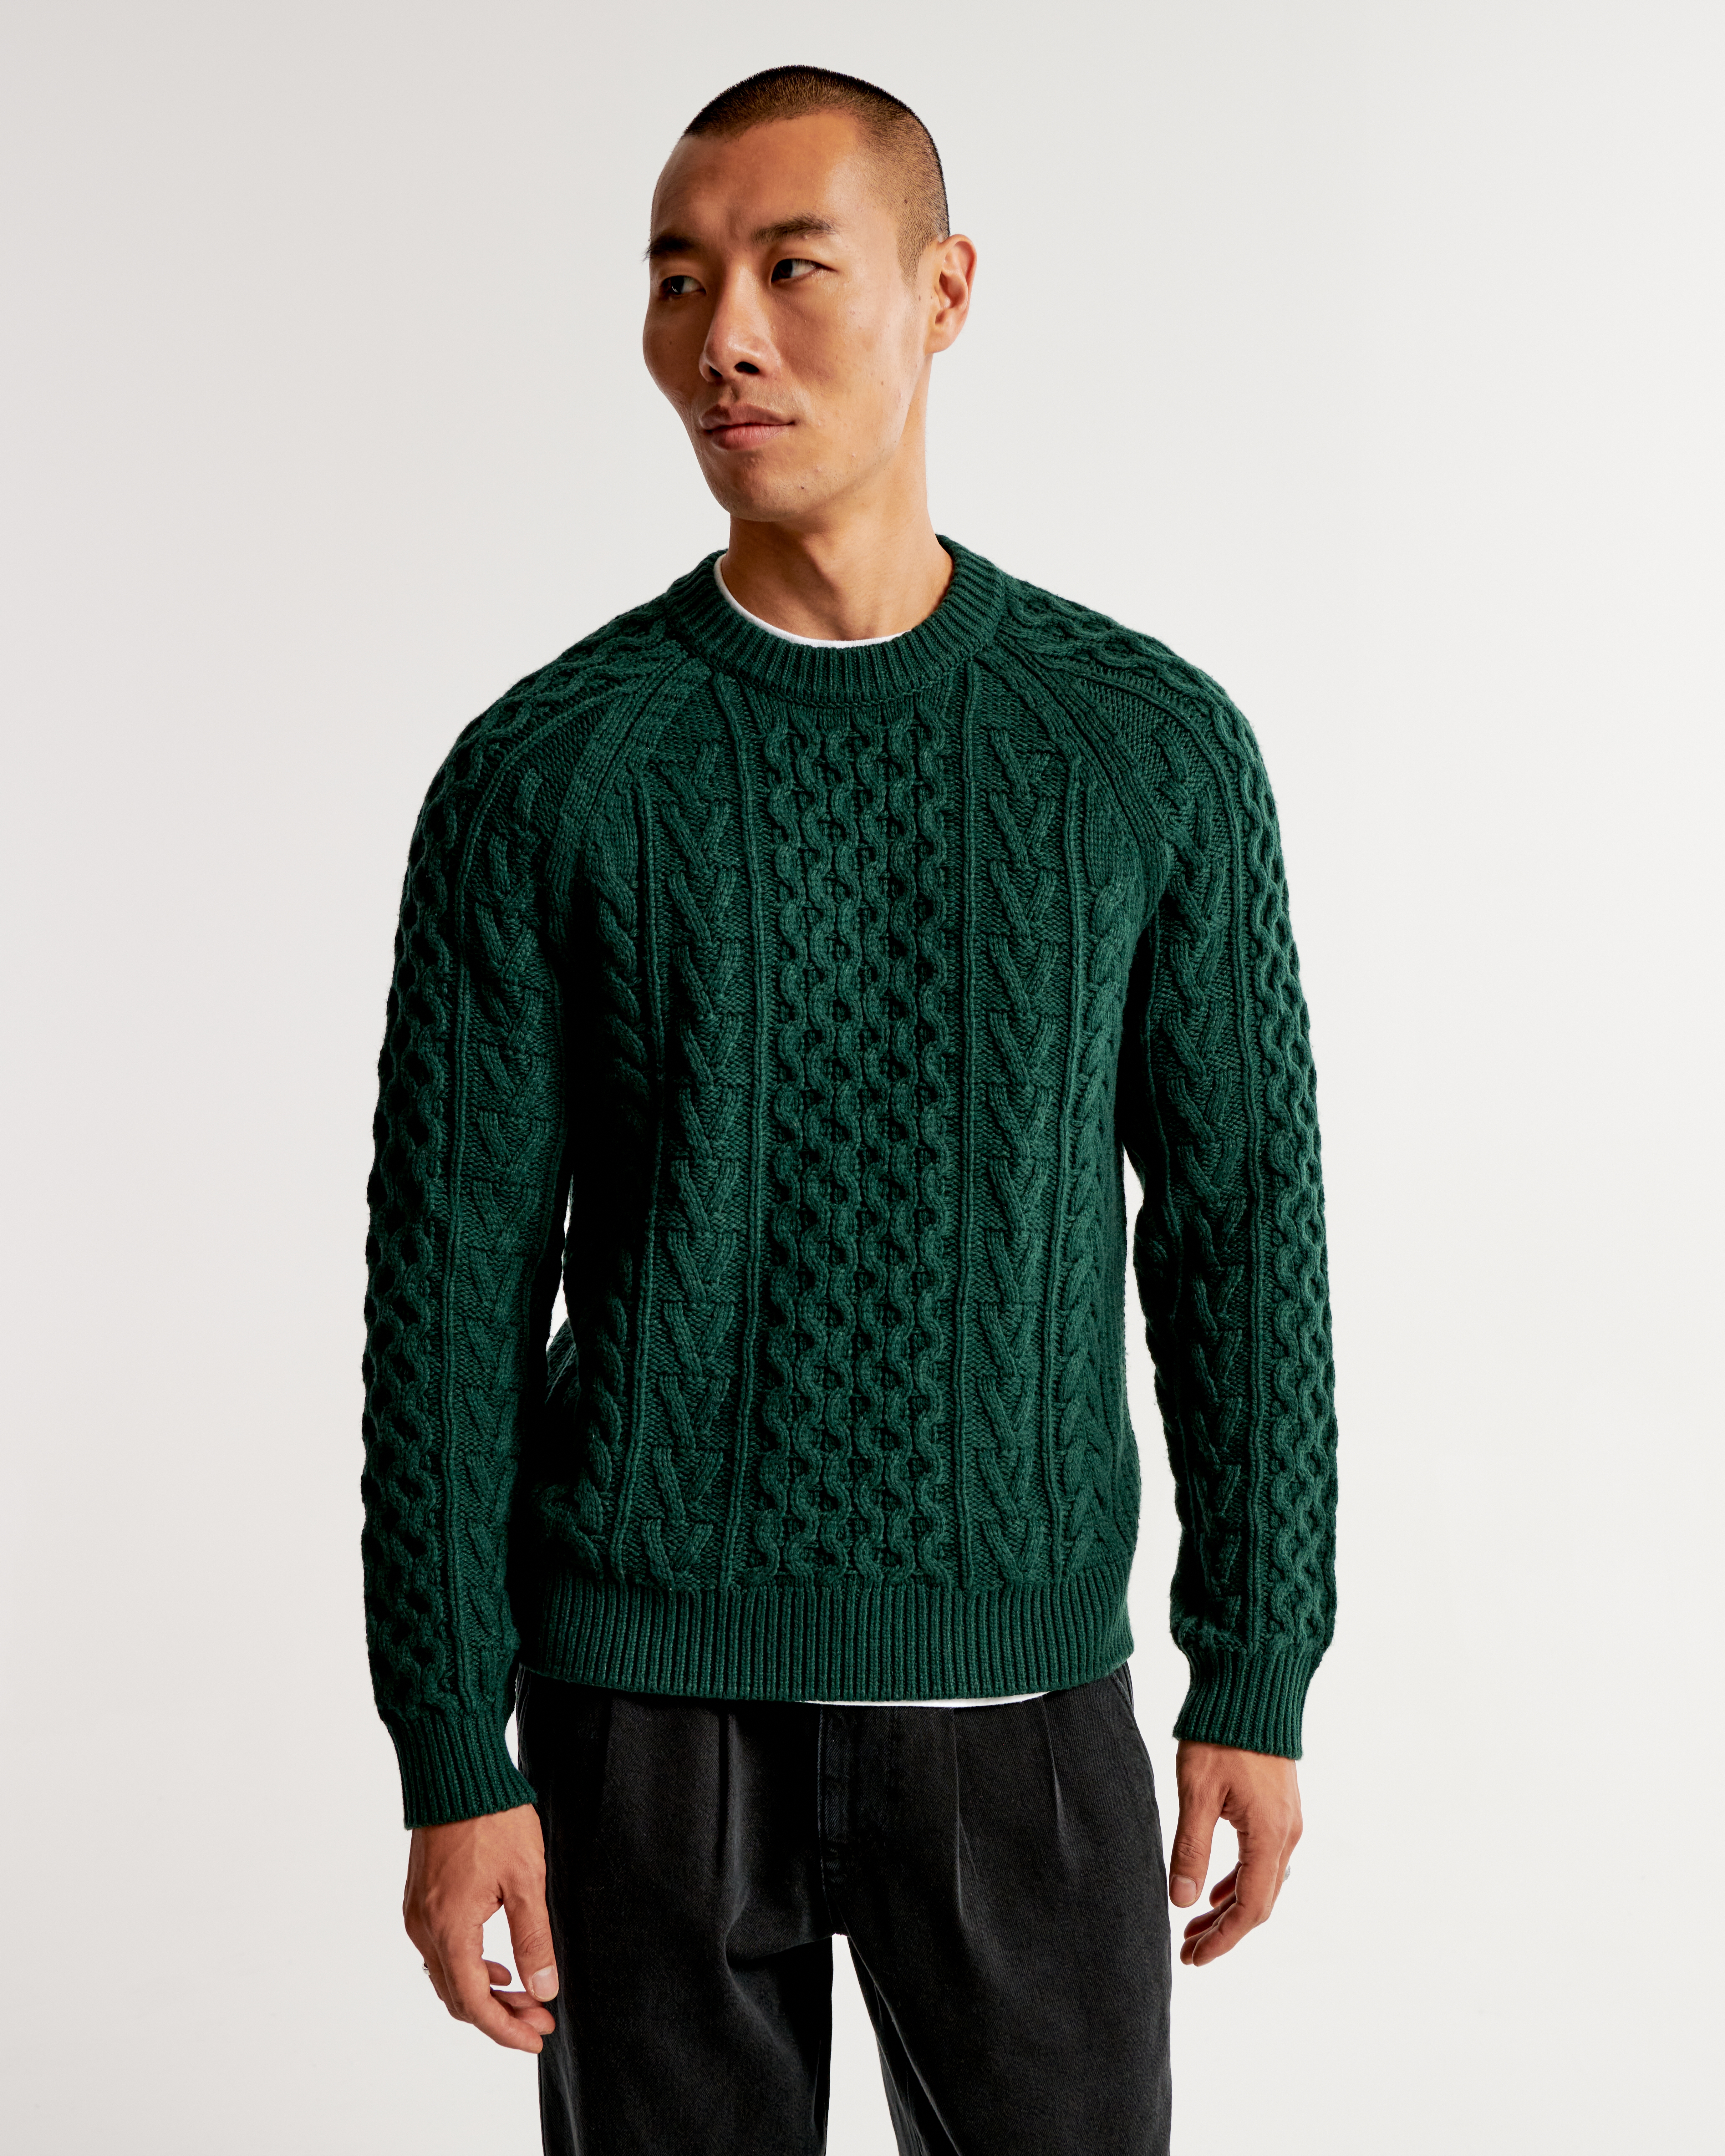 Men's Elevated Cable Stitch Crew Sweater | Men's Tops